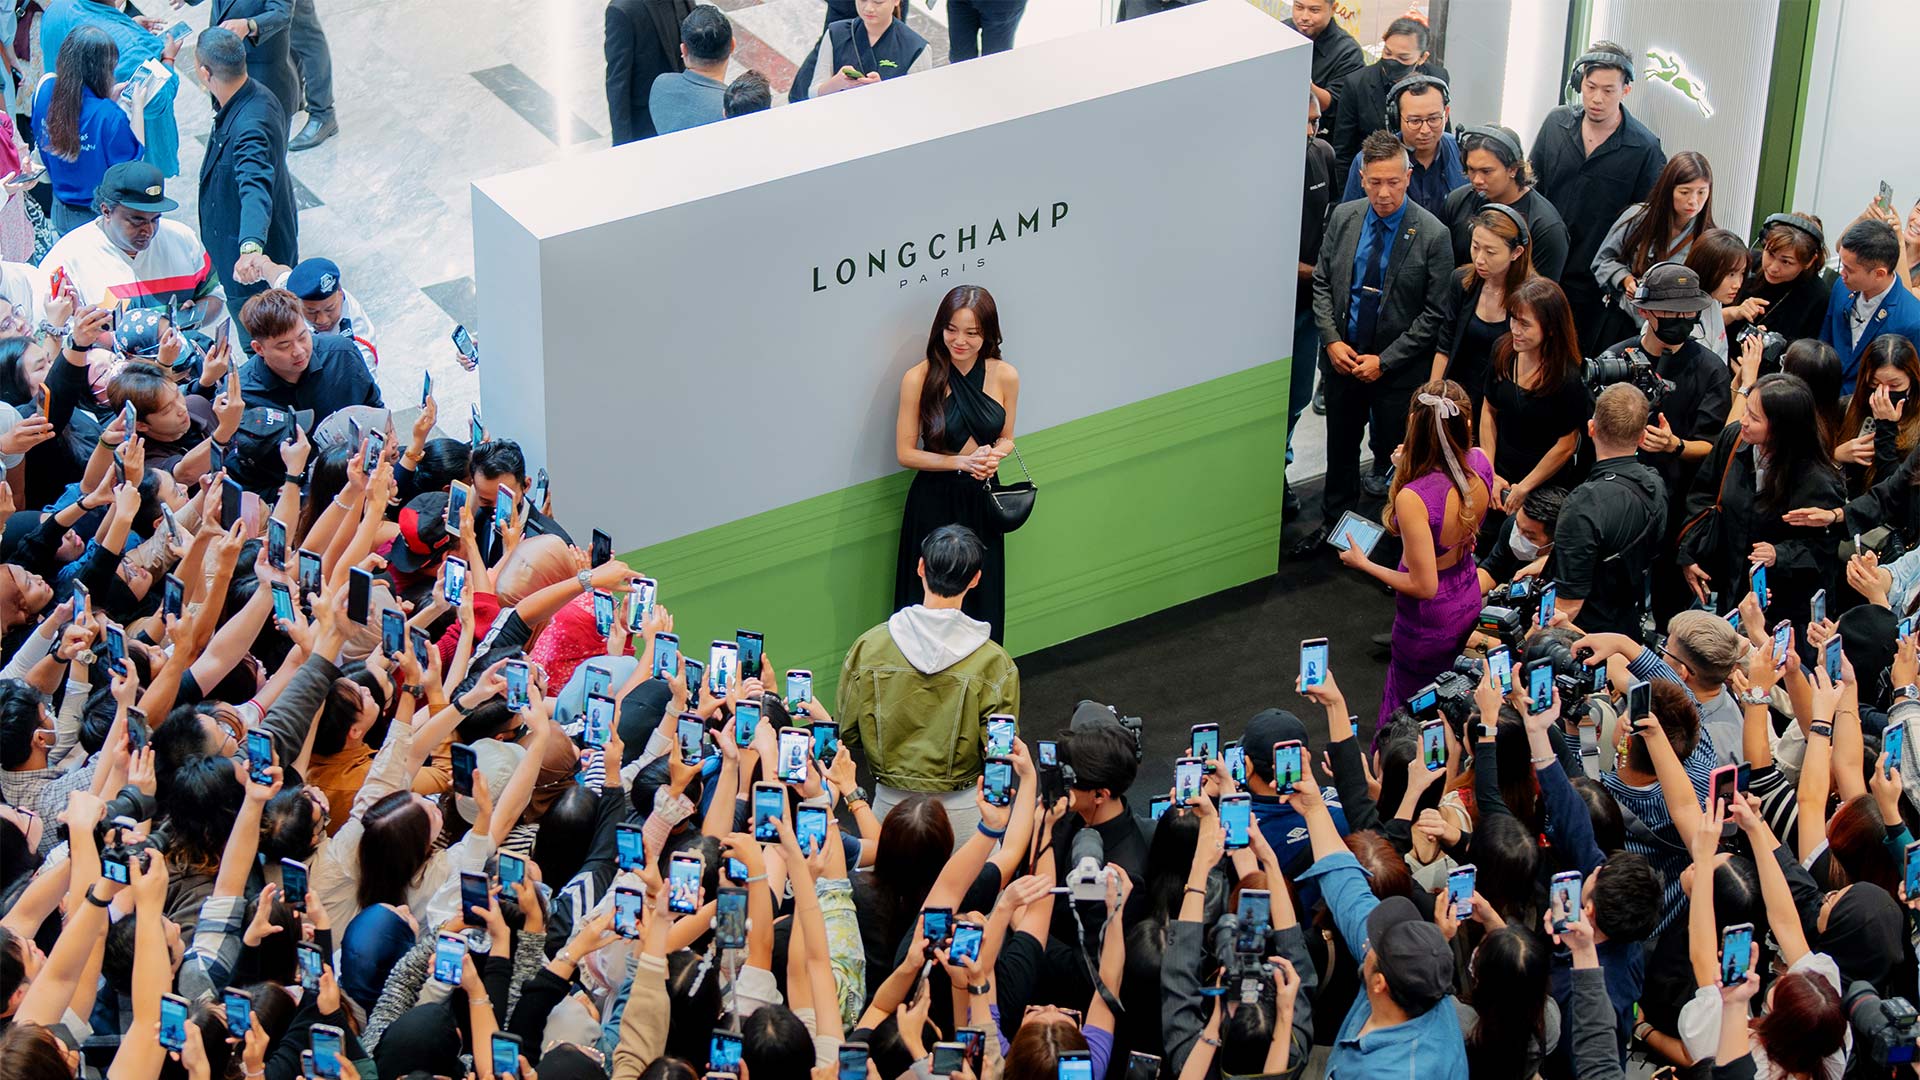 Interview: Actress Kim Se-Jeong on her appearance at Longchamp, The Exchange TRX